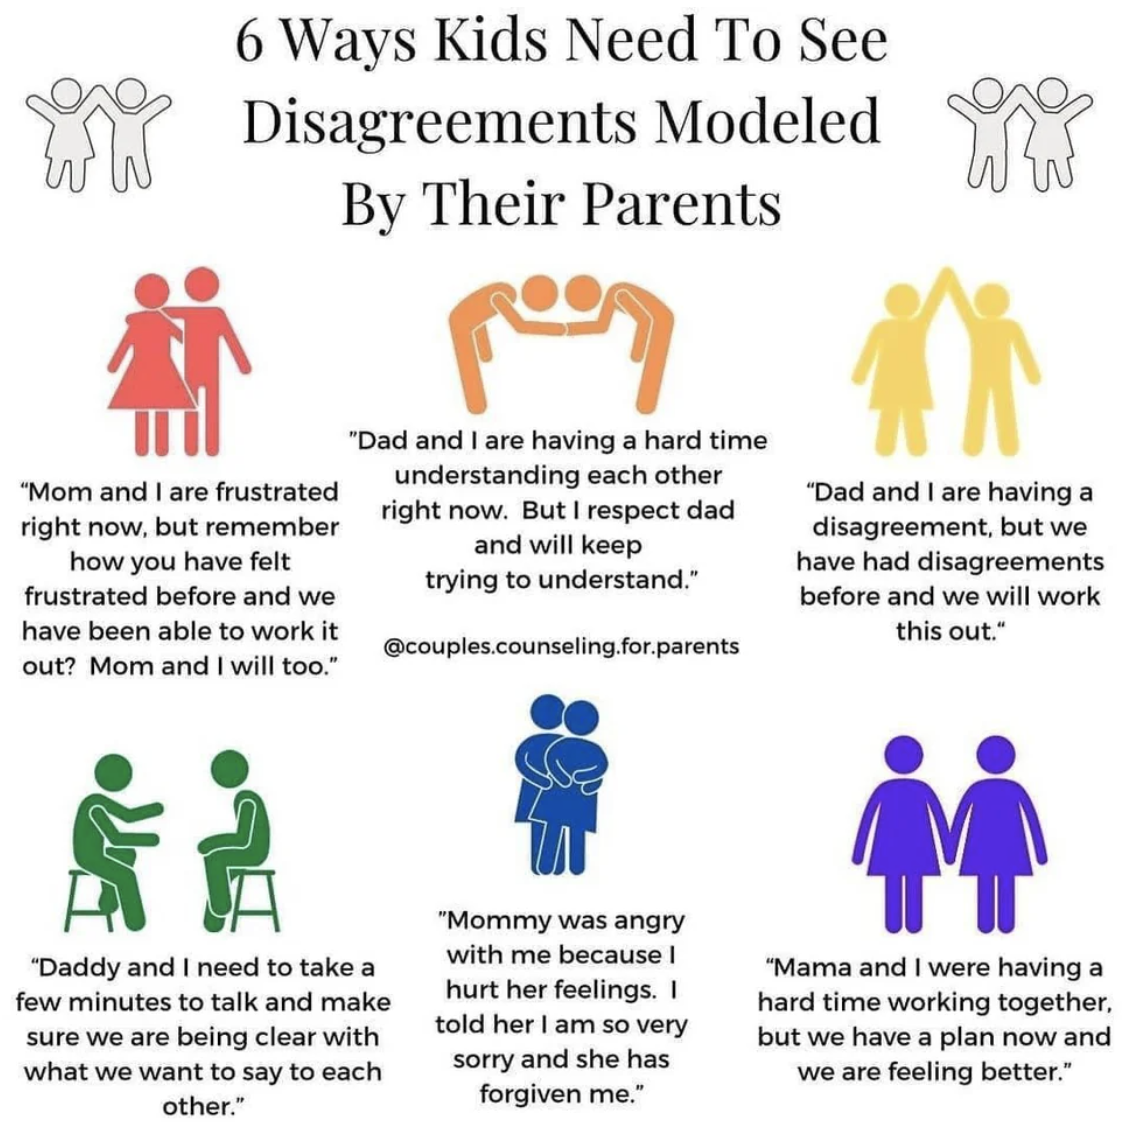 &quot;6 Ways Kids Need to See Disagreements Modeled by Their Parents,&quot; with illustrations showing how parents explain different disagreements